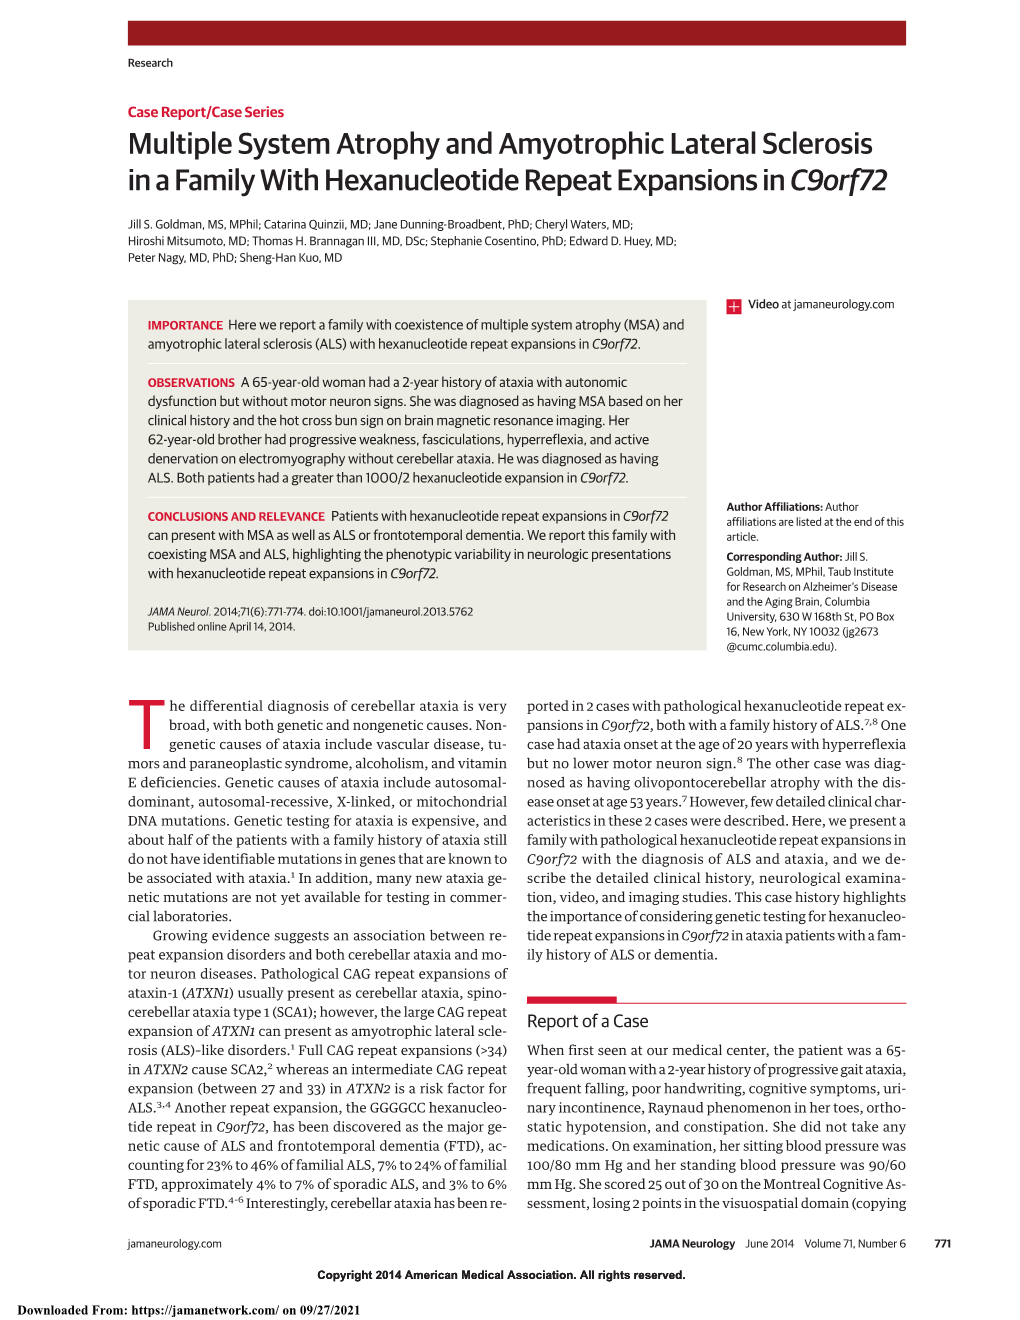 Multiple System Atrophy and Amyotrophic Lateral Sclerosis in a Family with Hexanucleotide Repeat Expansions in C9orf72